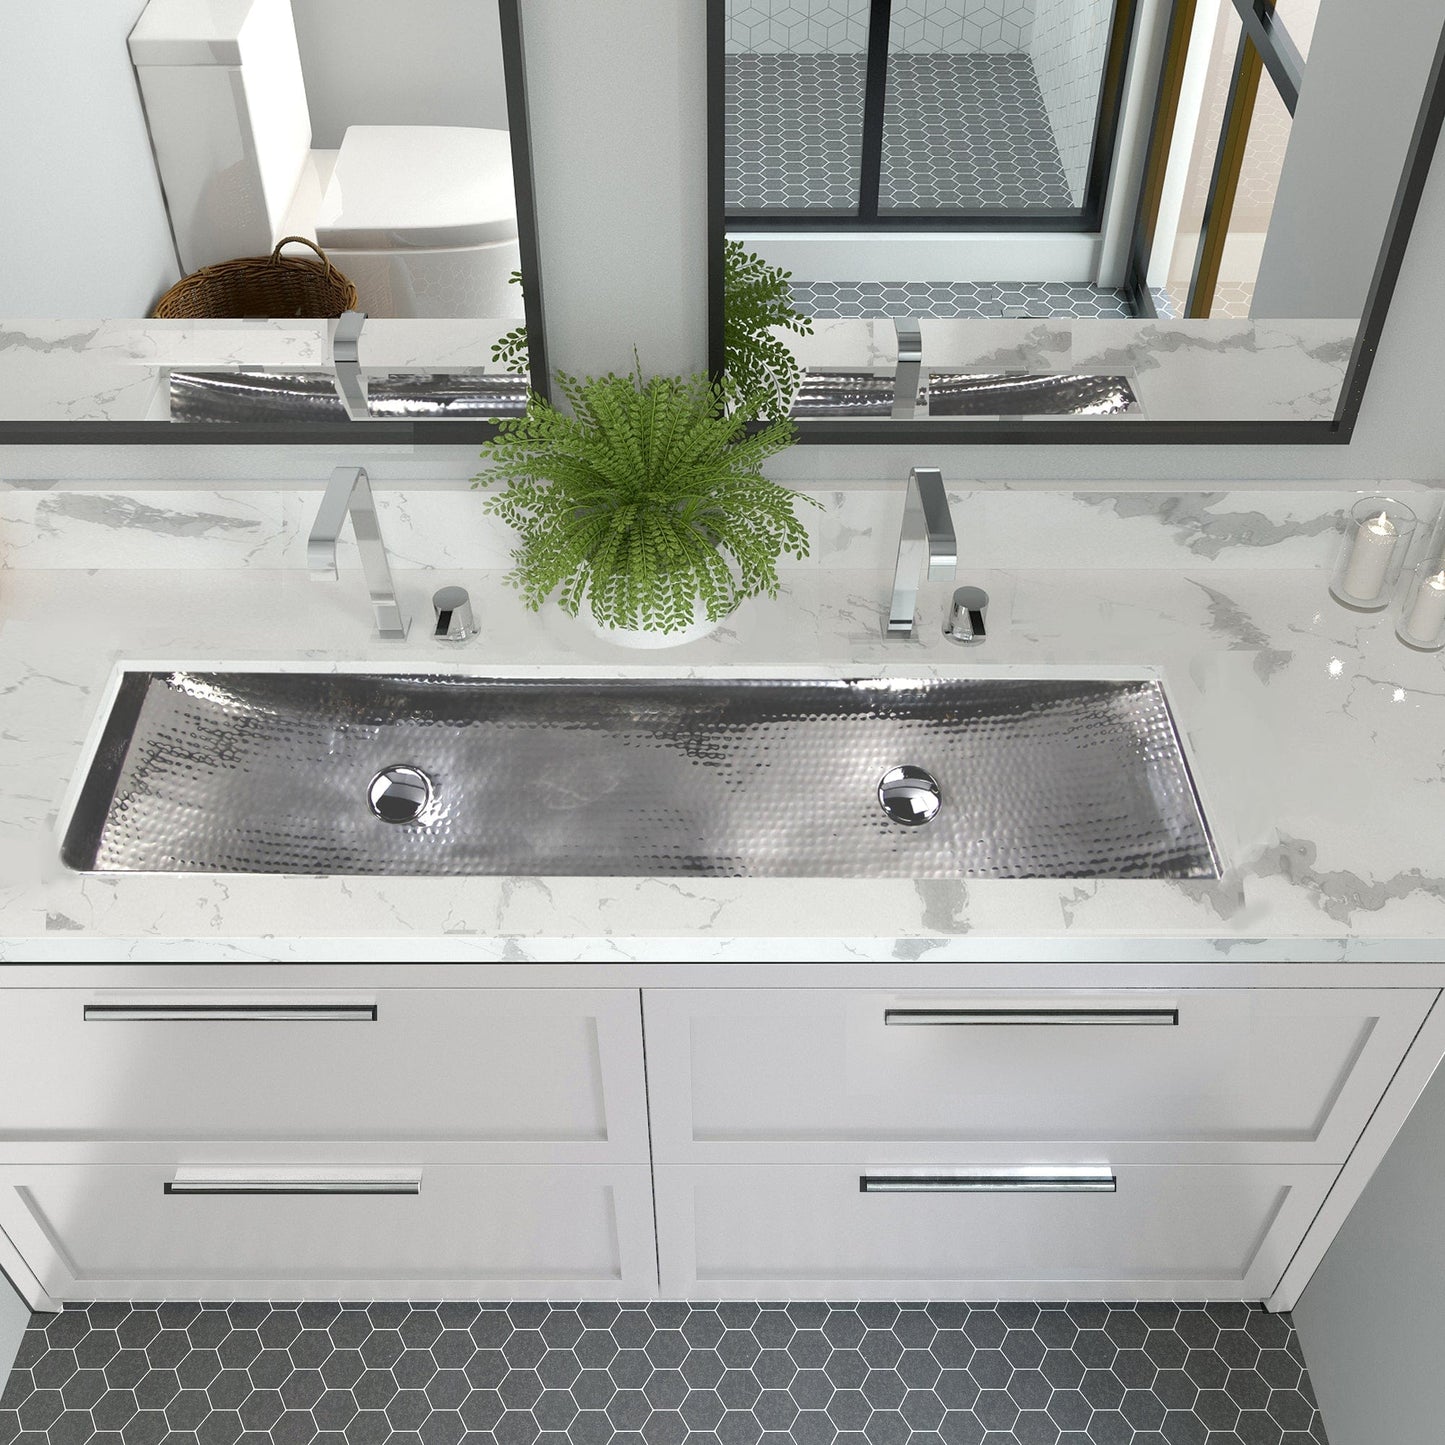 Nantucket Stainless Steel Double Trough Undermount Bathroom Sink with Overflow - TRS48-OF